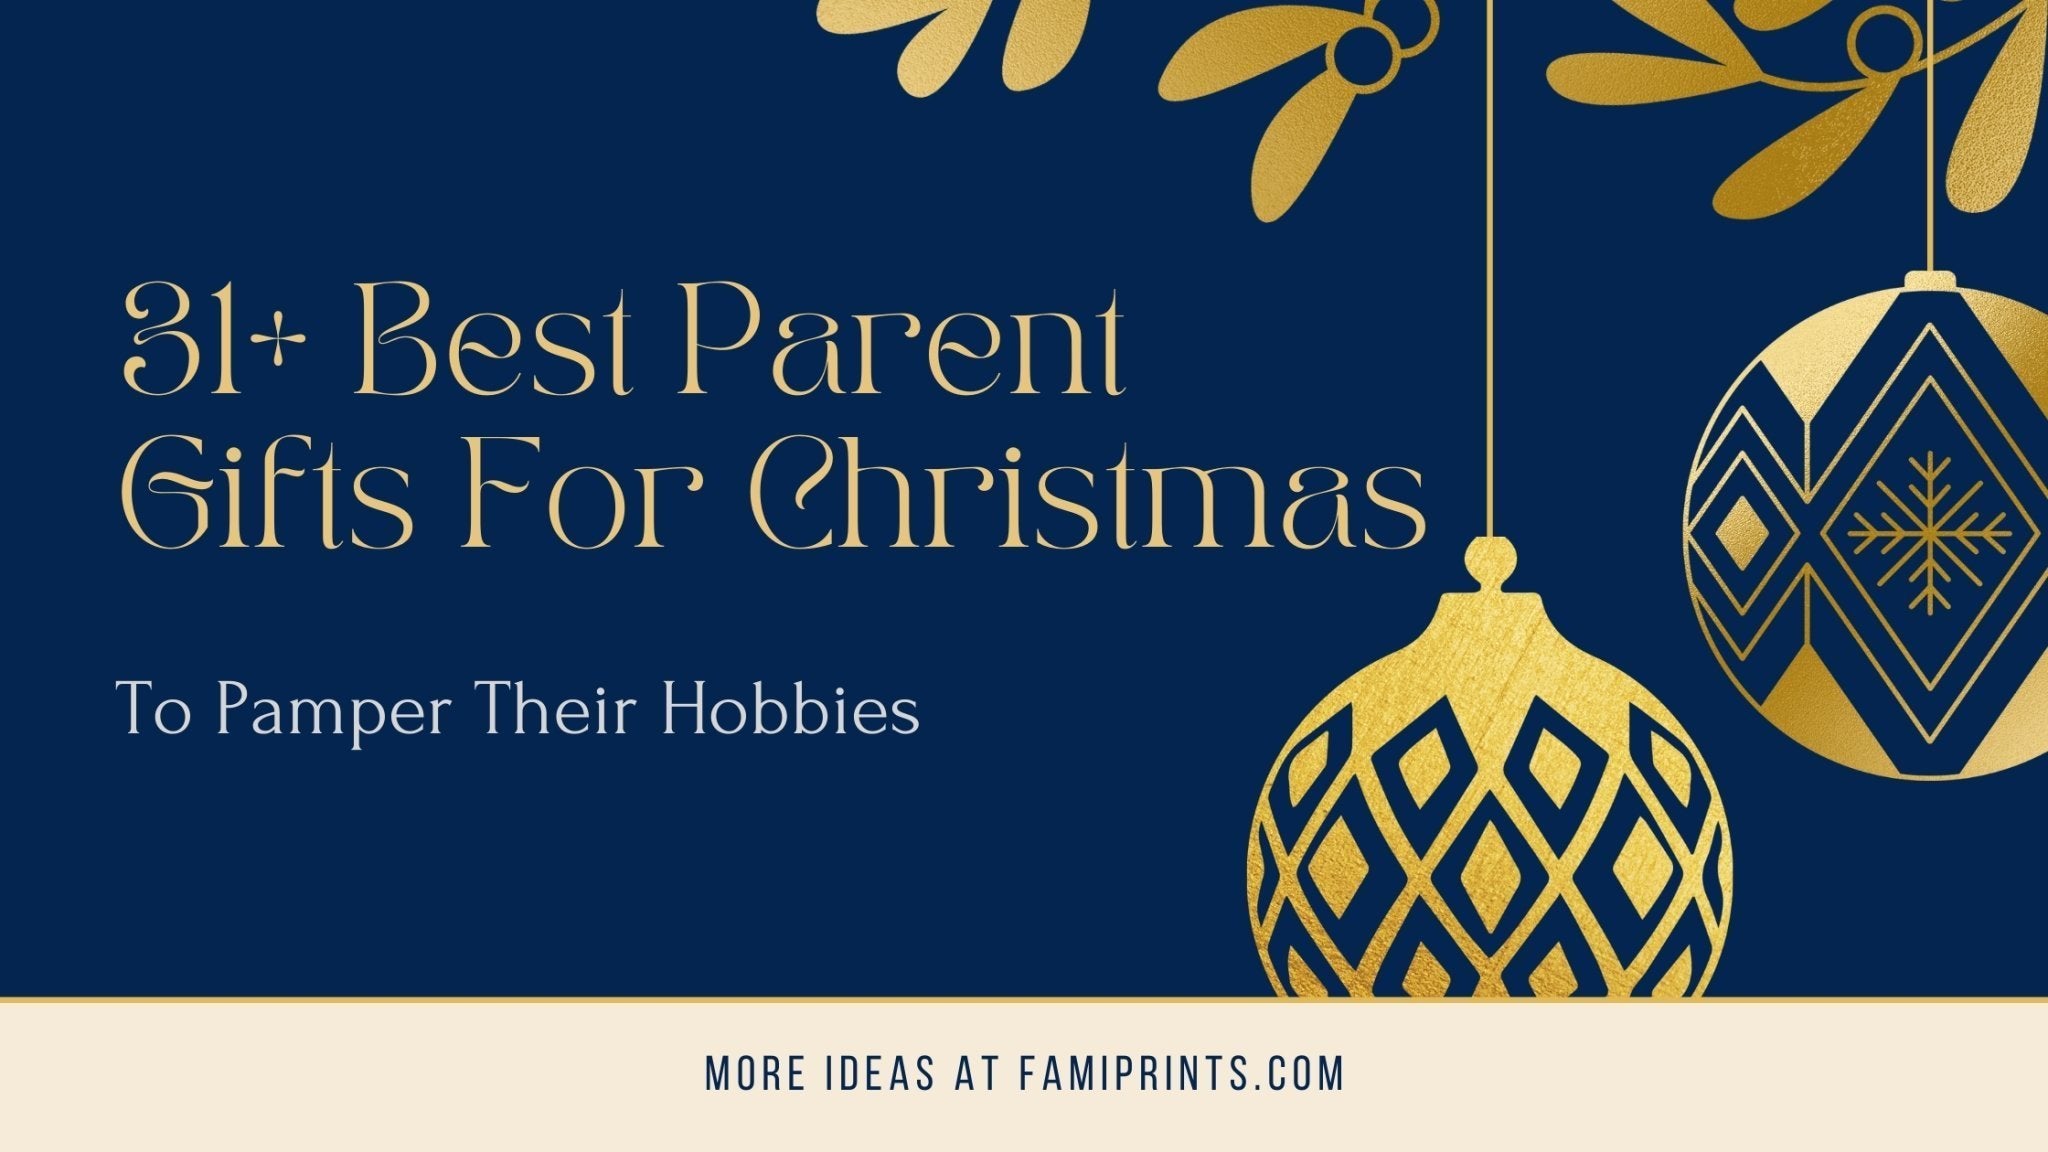 31+ Best Parent Gifts For Christmas To Pamper Their Hobbies - FamiPrints | Trending Customizable Family Gifts